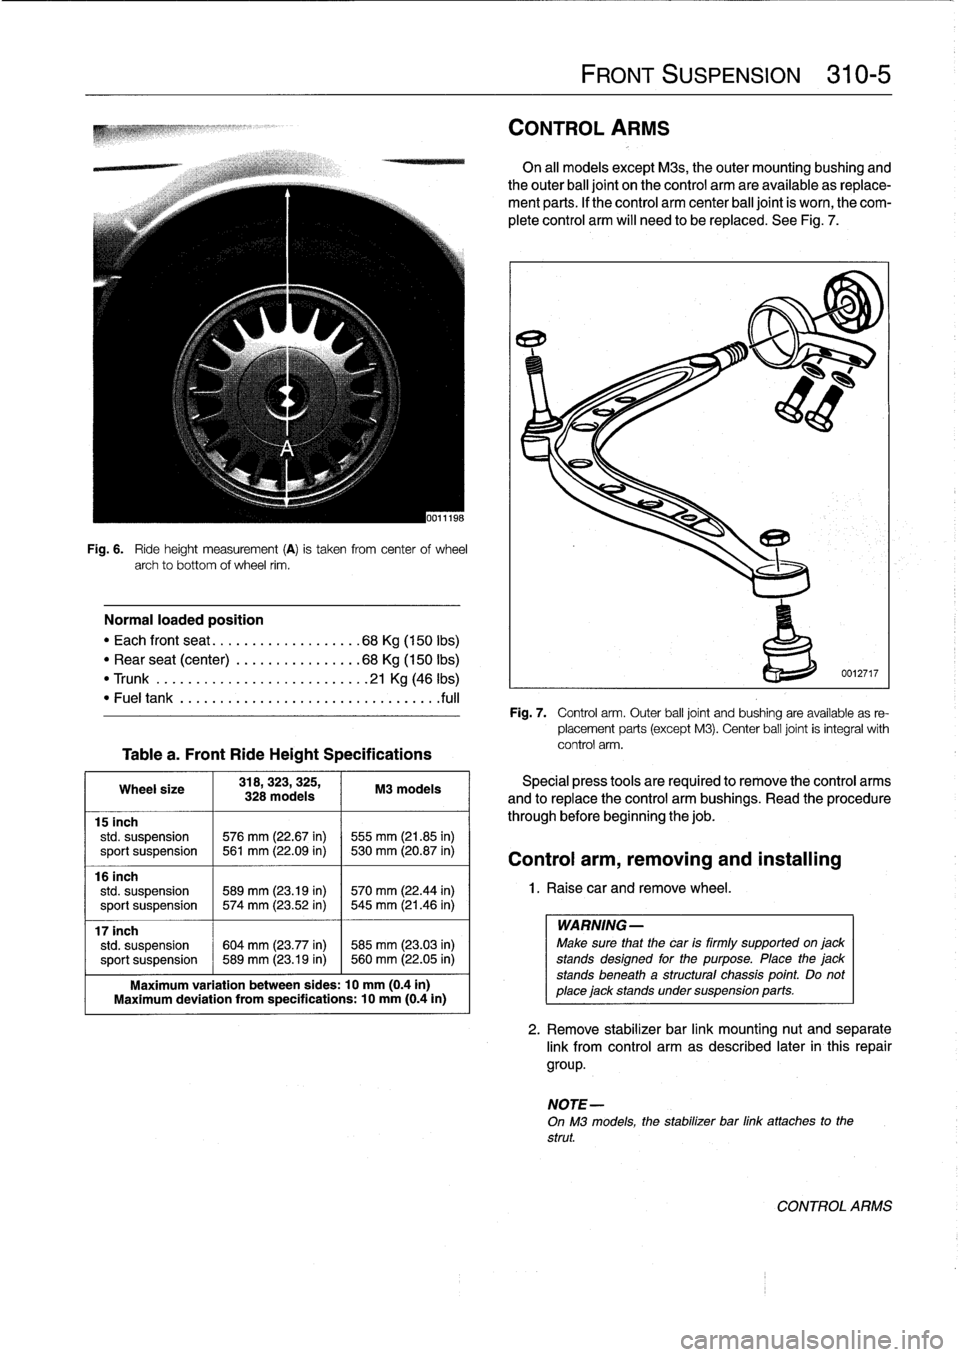 BMW 323i 1993 E36 Workshop Manual 
Fig
.
6
.

	

Ride
height
measurement
(A)
is
taken
from
centerof
wheel
archto
bottom
of
wheel
rim
.

Normal
loaded
position

"
Each
front
seat
...
...
.
..
..........
68Kg
(150
Ibs)

"
Rear
seat
(cen